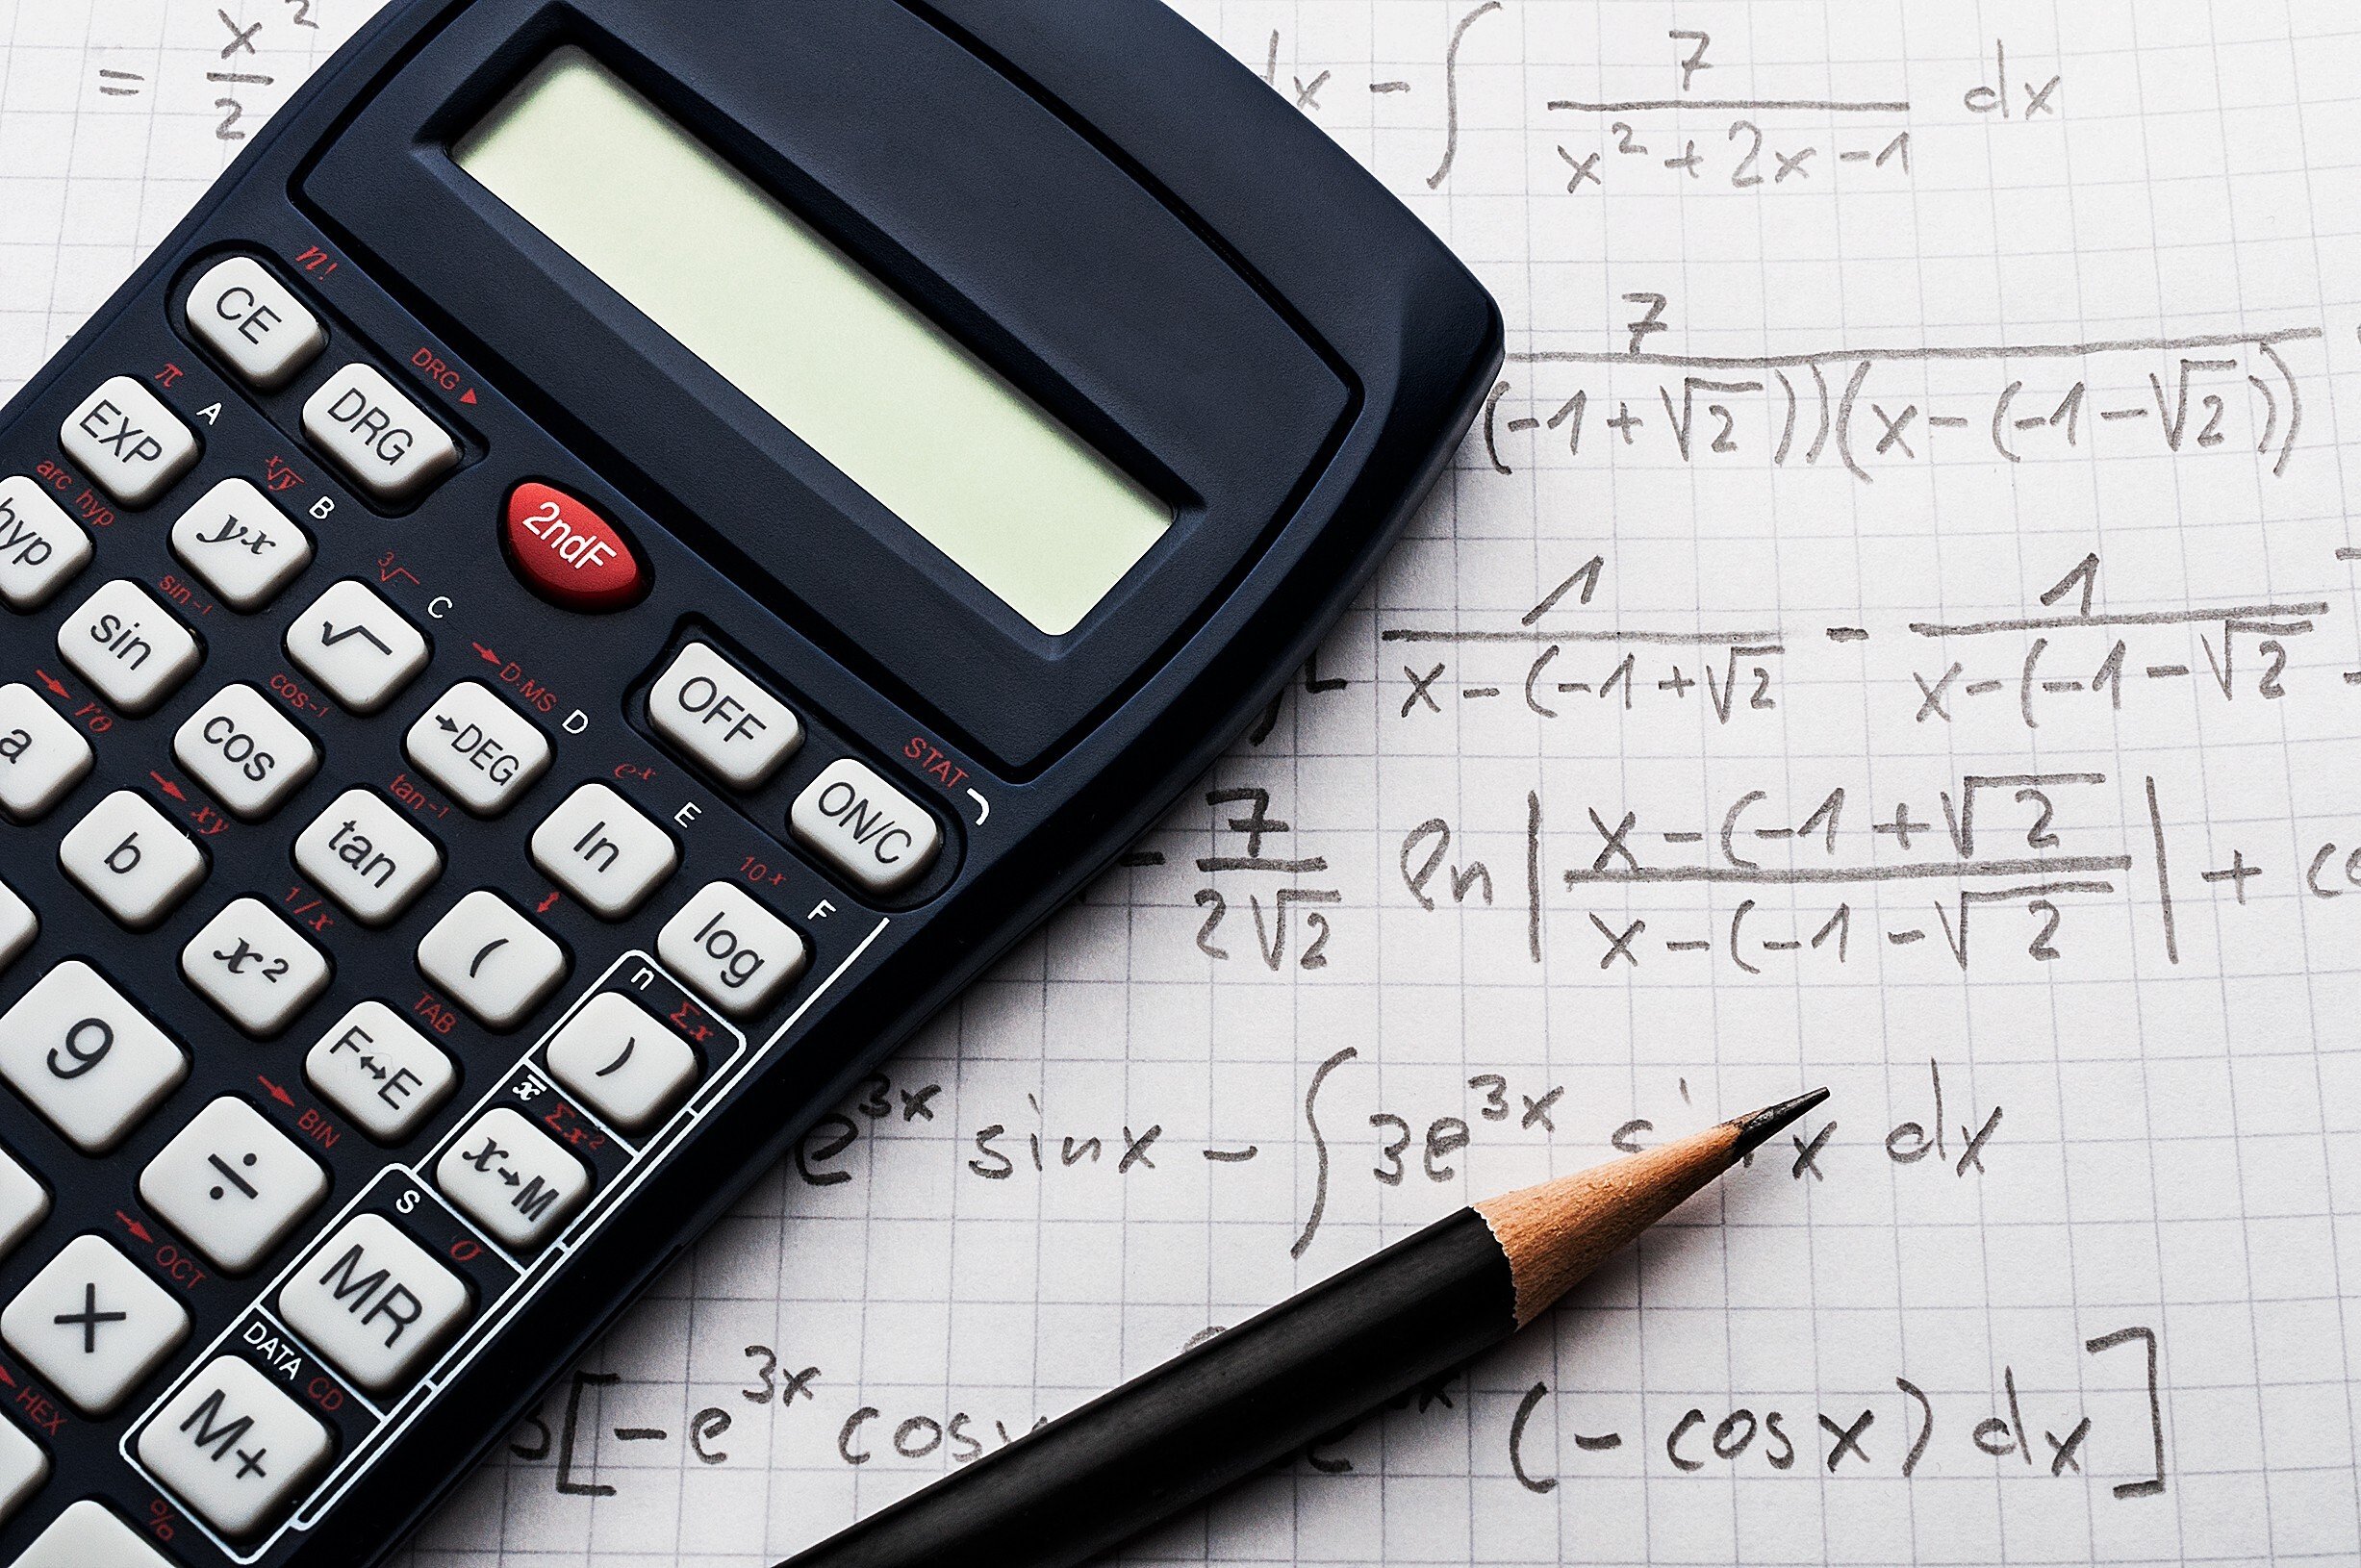 Nervous about your maths assessment? Here's some tips on how to nail the HKDSE.